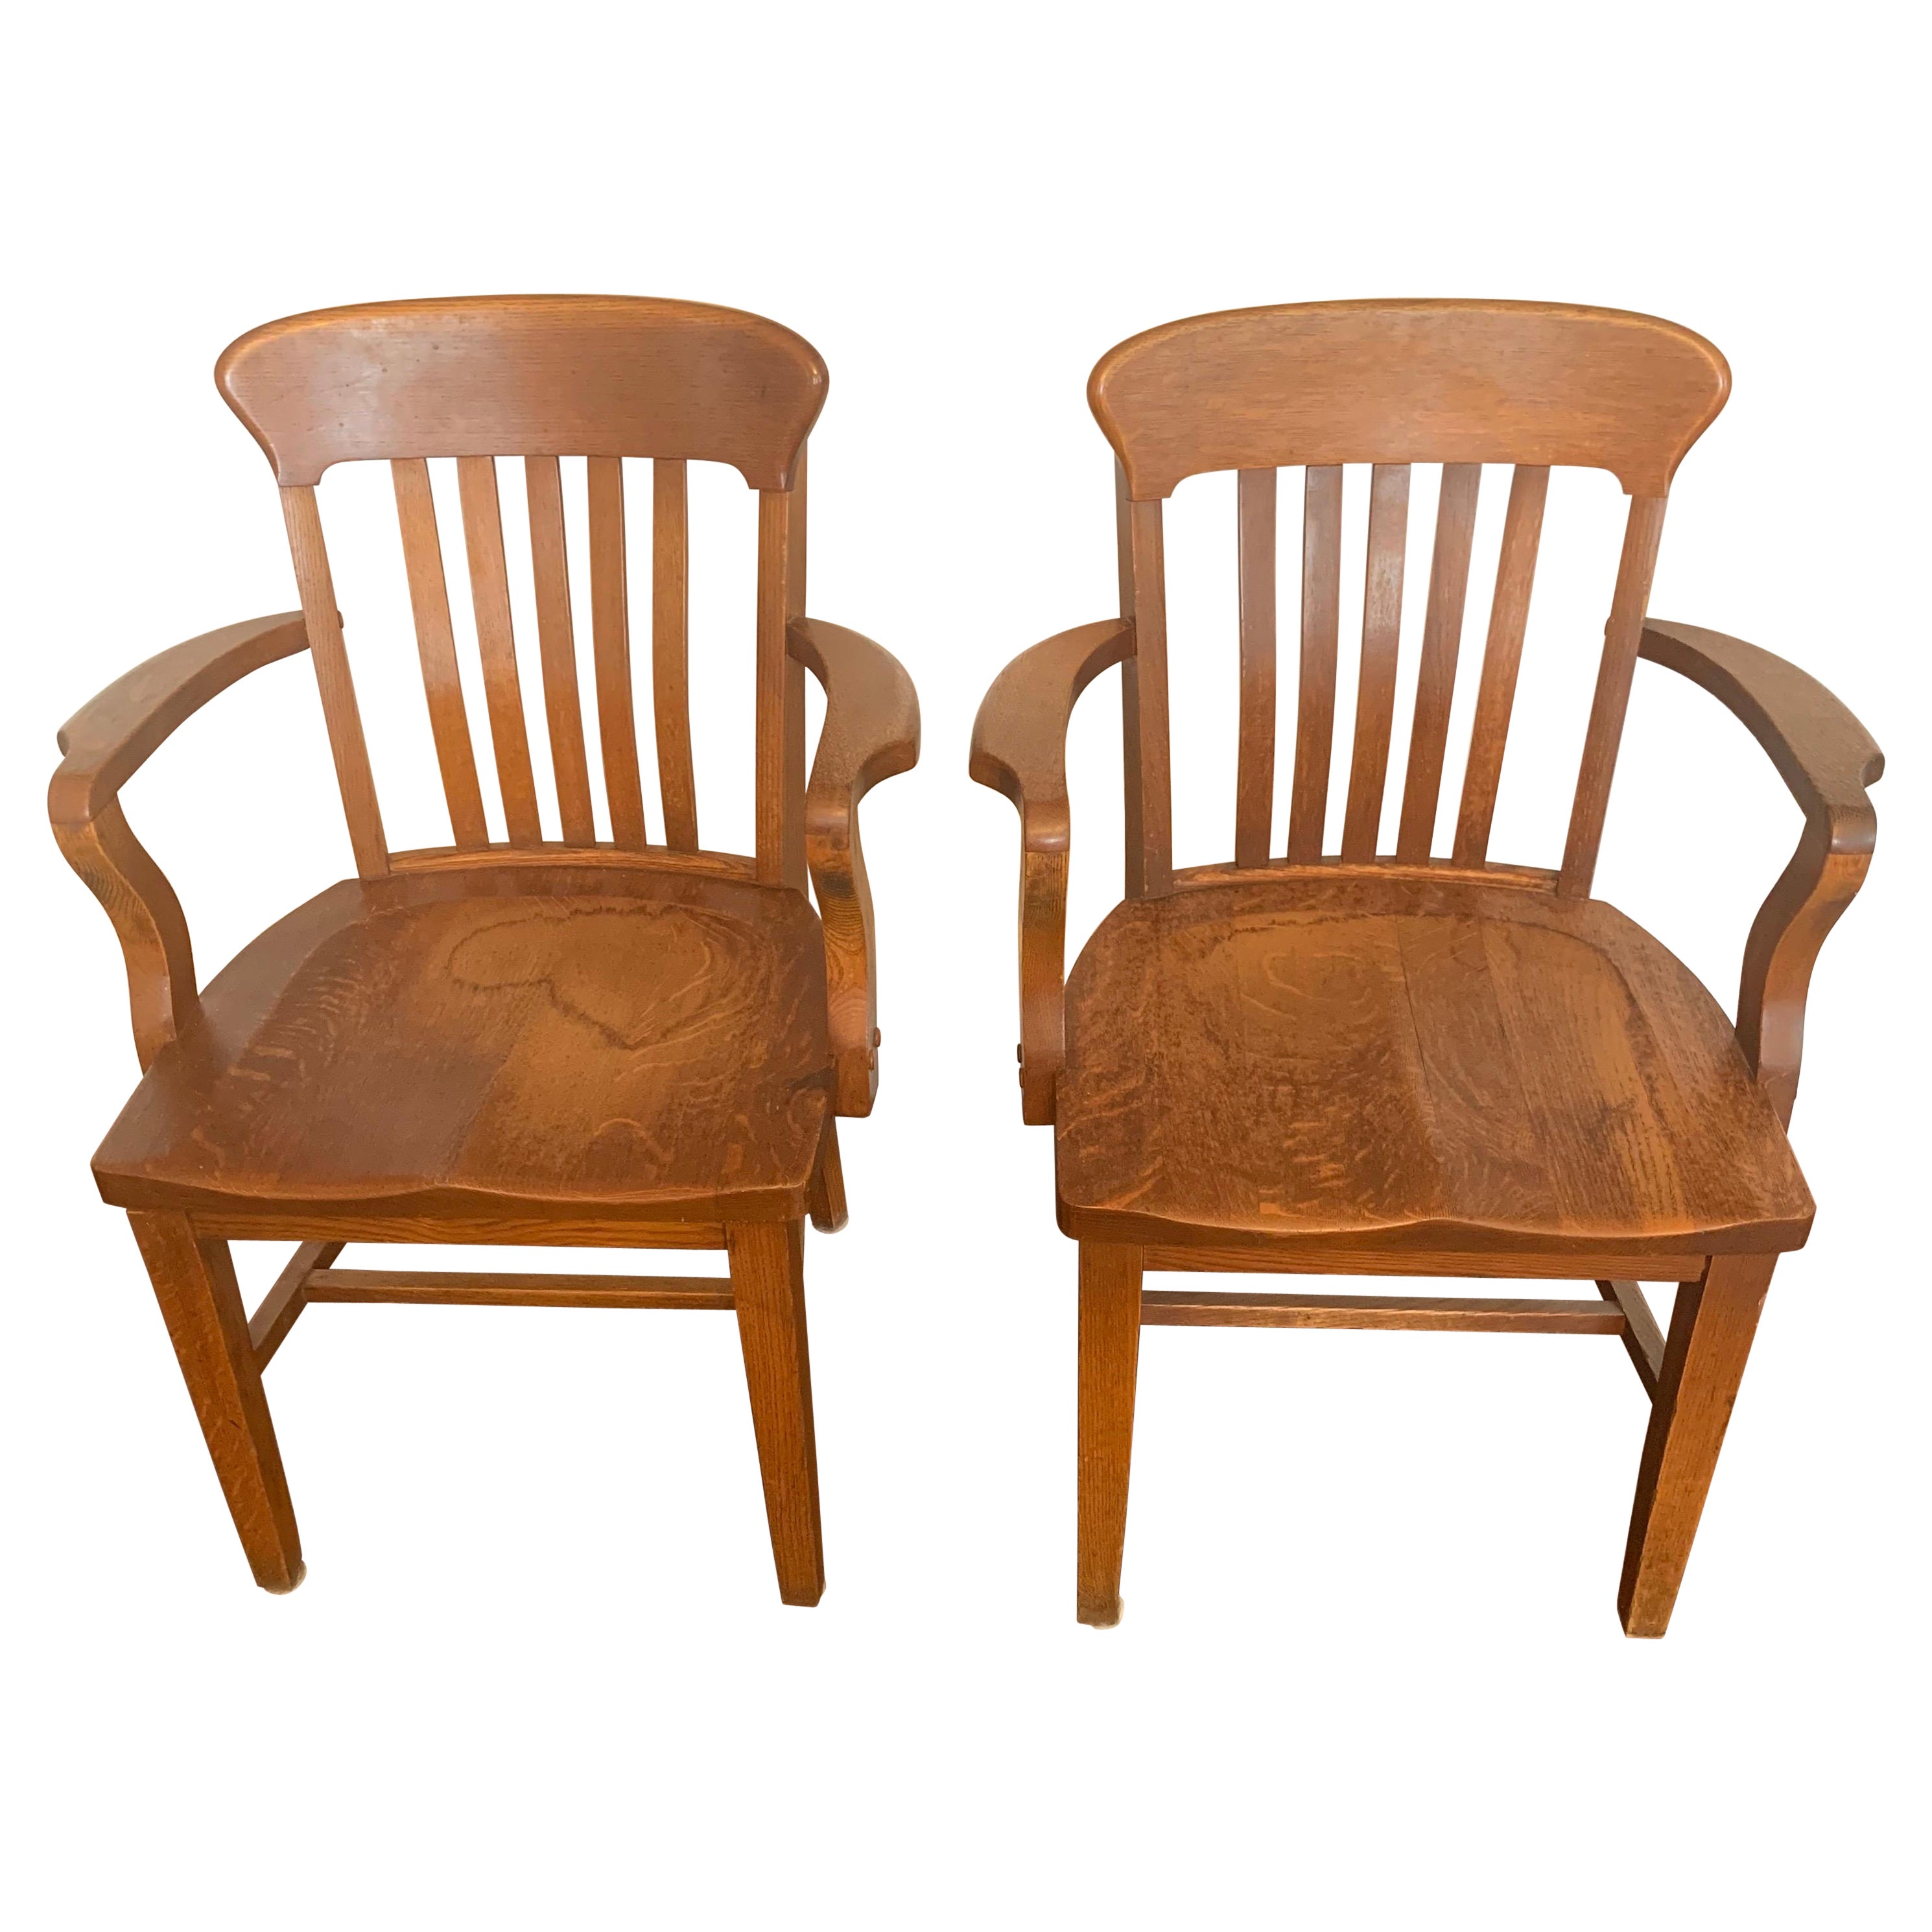 Pair of Vintage Oak Banker's / Barrister's Armchairs